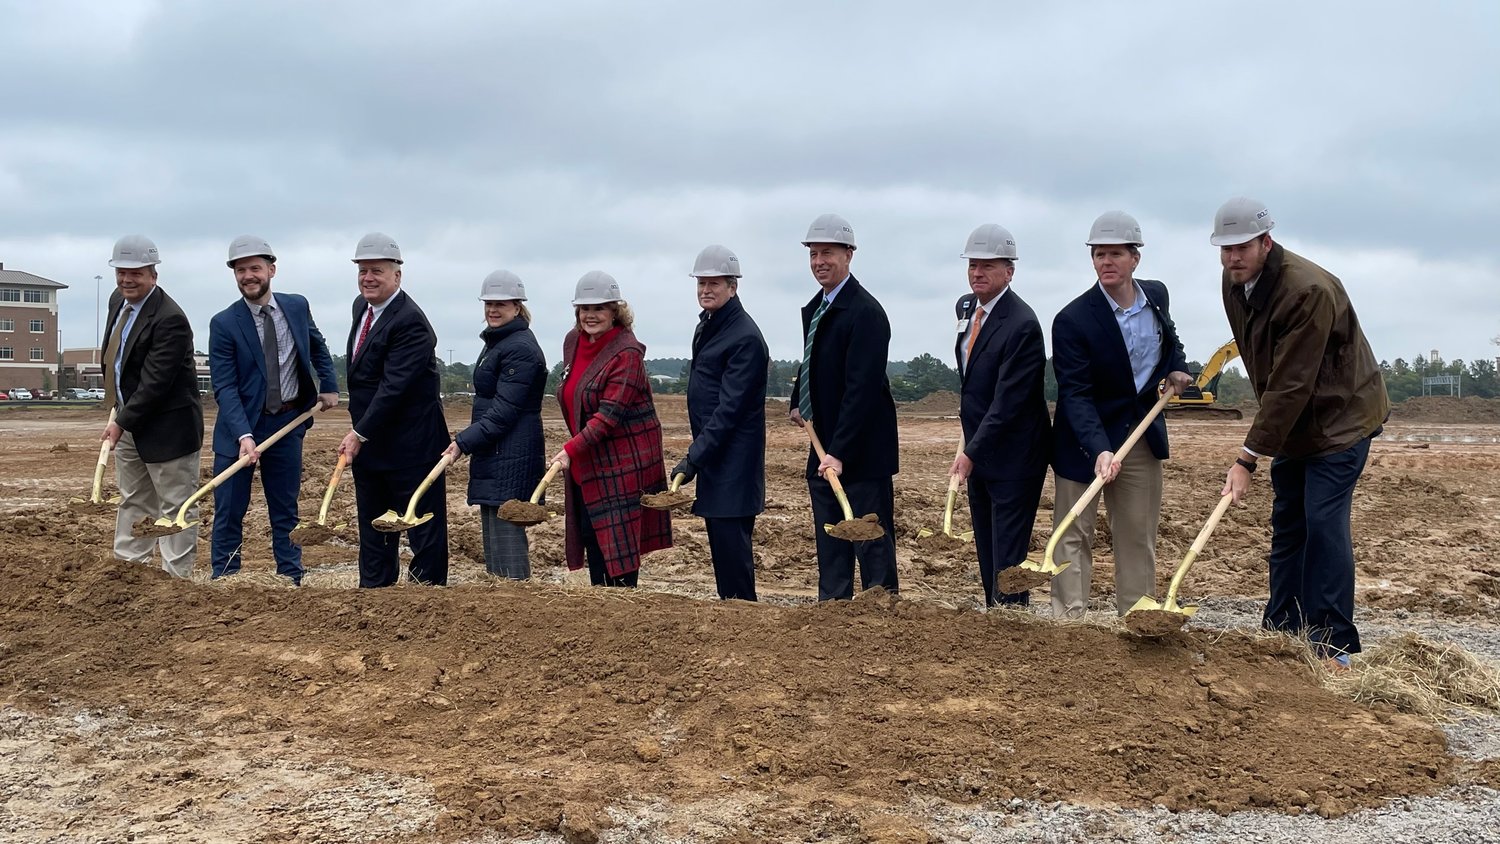 Mayor Mary Hawkins-Butler along with representatives from Jackson Eye Associates, Mississippi Retina Associates, Baptist Hospital, and Codaray Construction officially break ground to kick off the construction of a new state-of-the-art medical facility behind the Madison Primos Cafe. The facility is expected to be completed in December 2023.